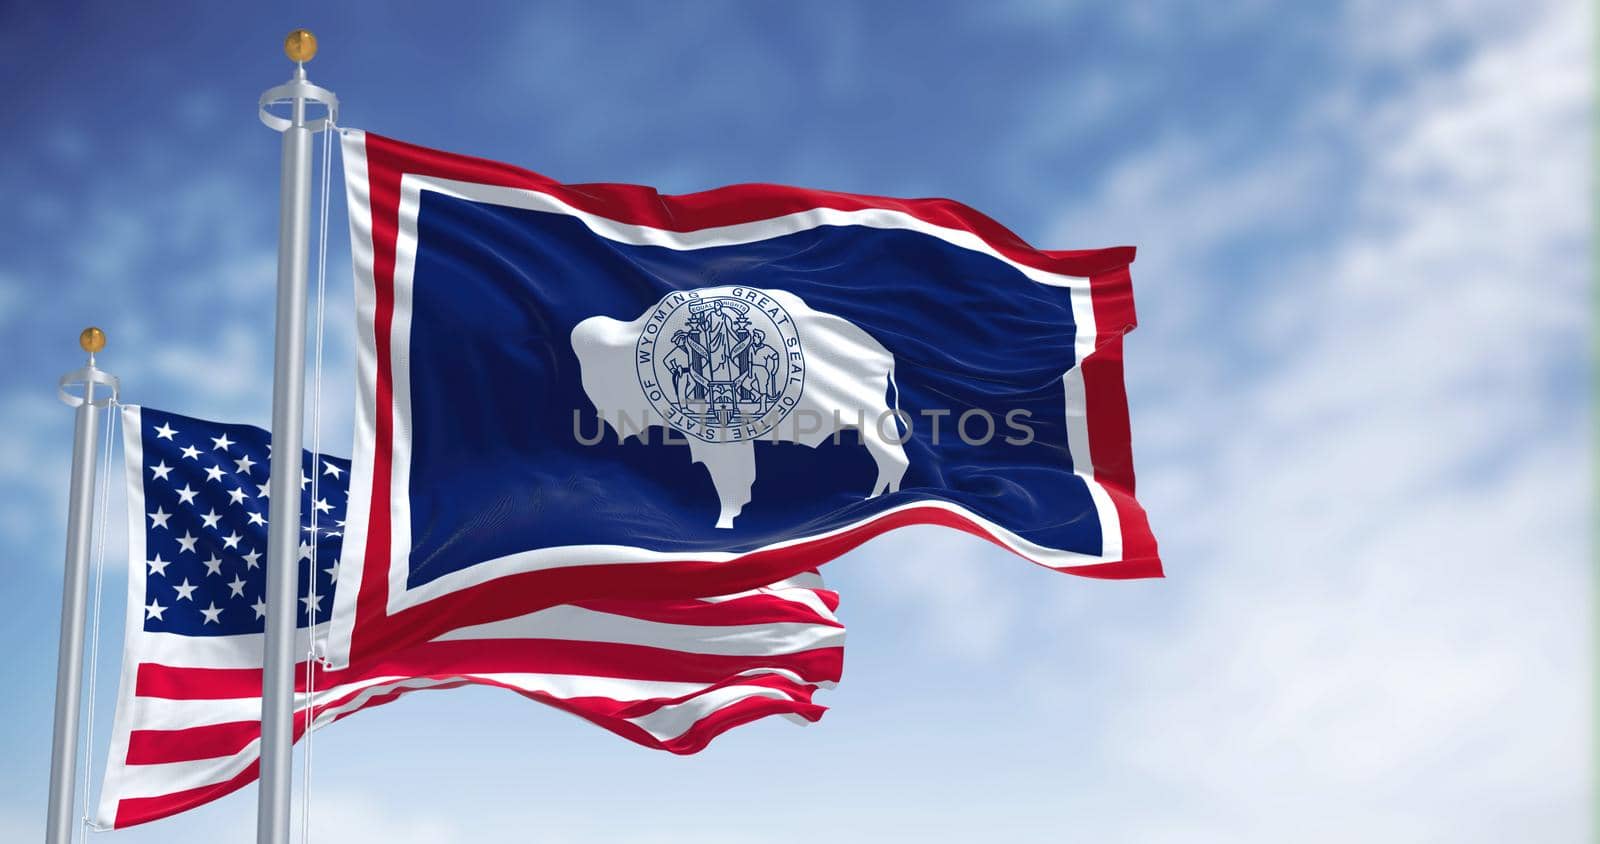 The Wyoming state flag waving along with the national flag of the United States of America by rarrarorro